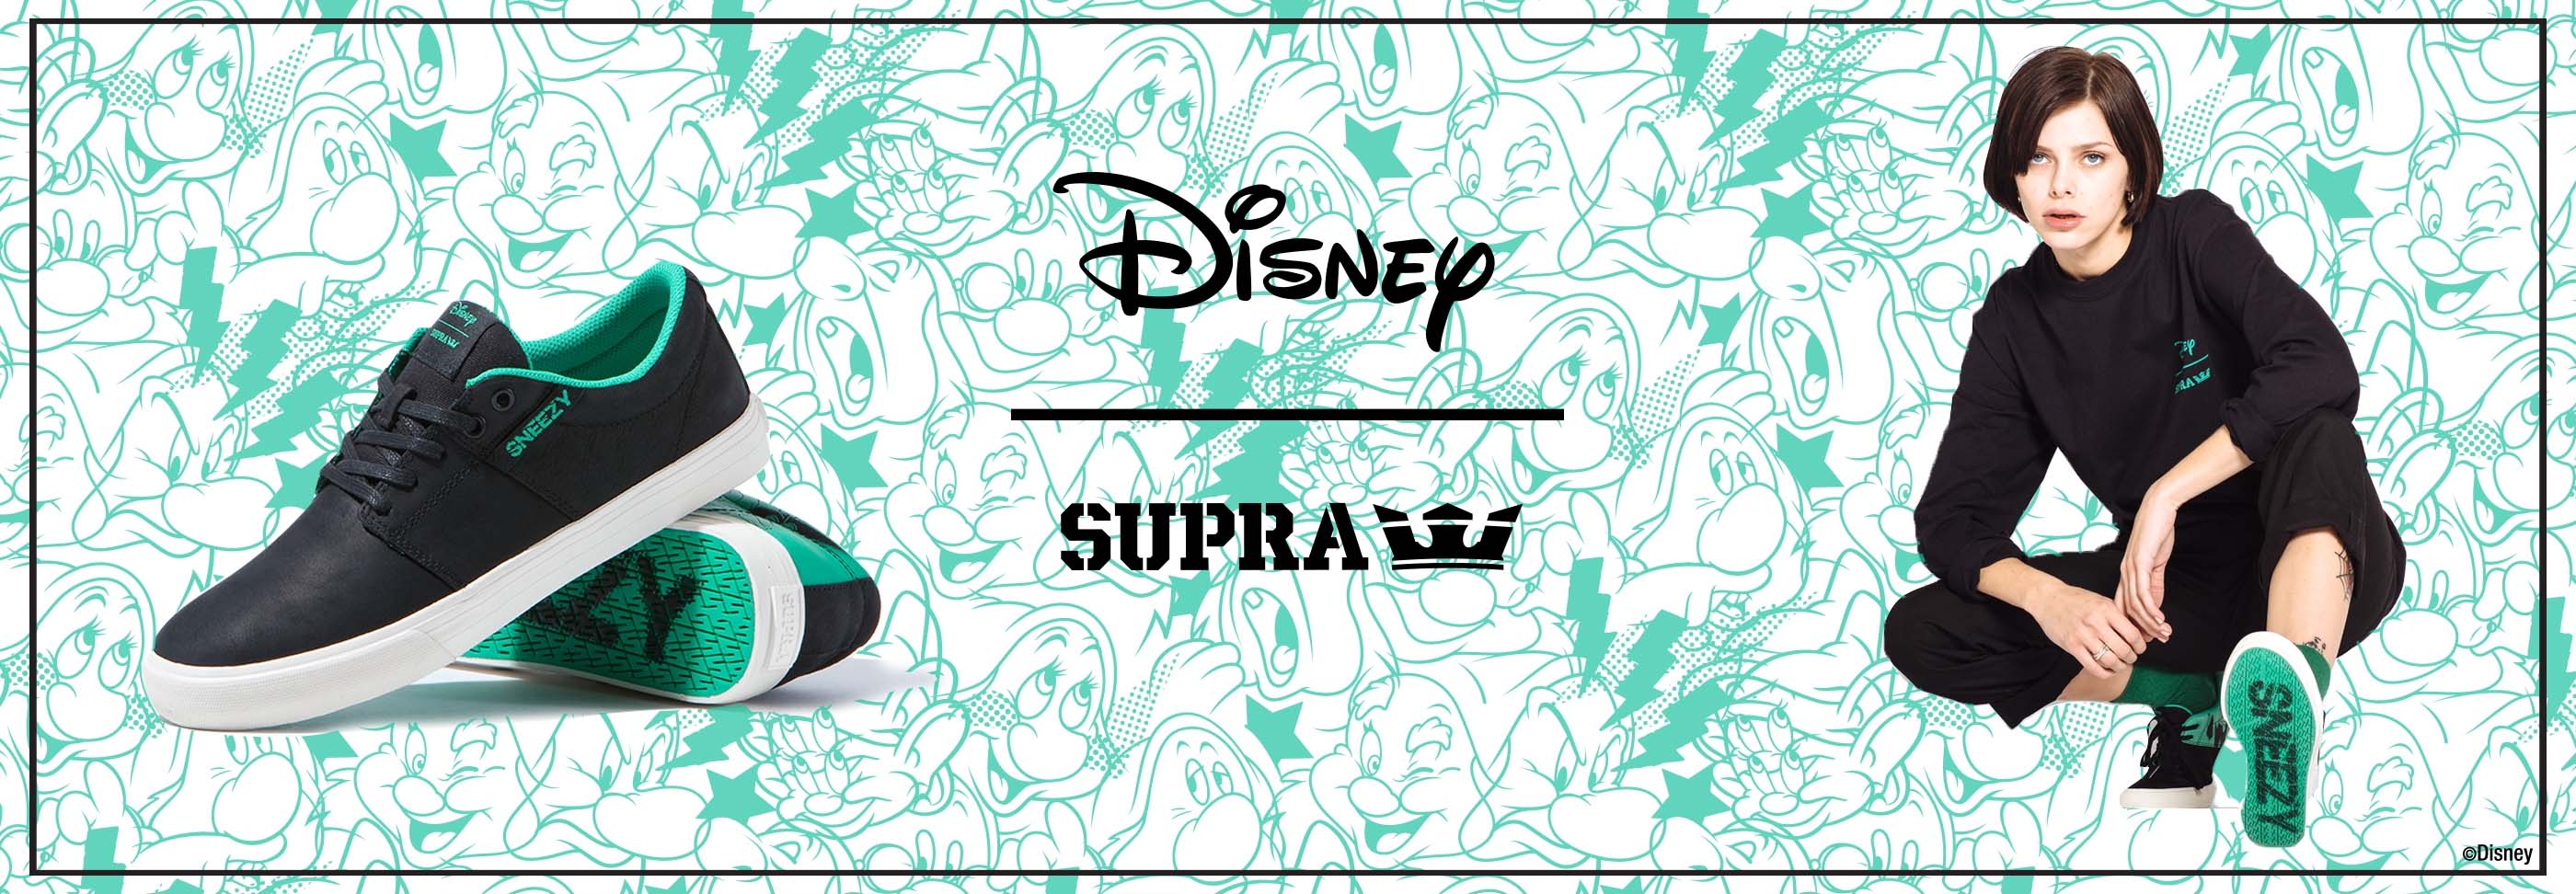 Supra Skate 2018: Introducing Disney Snow White Shoes Collection